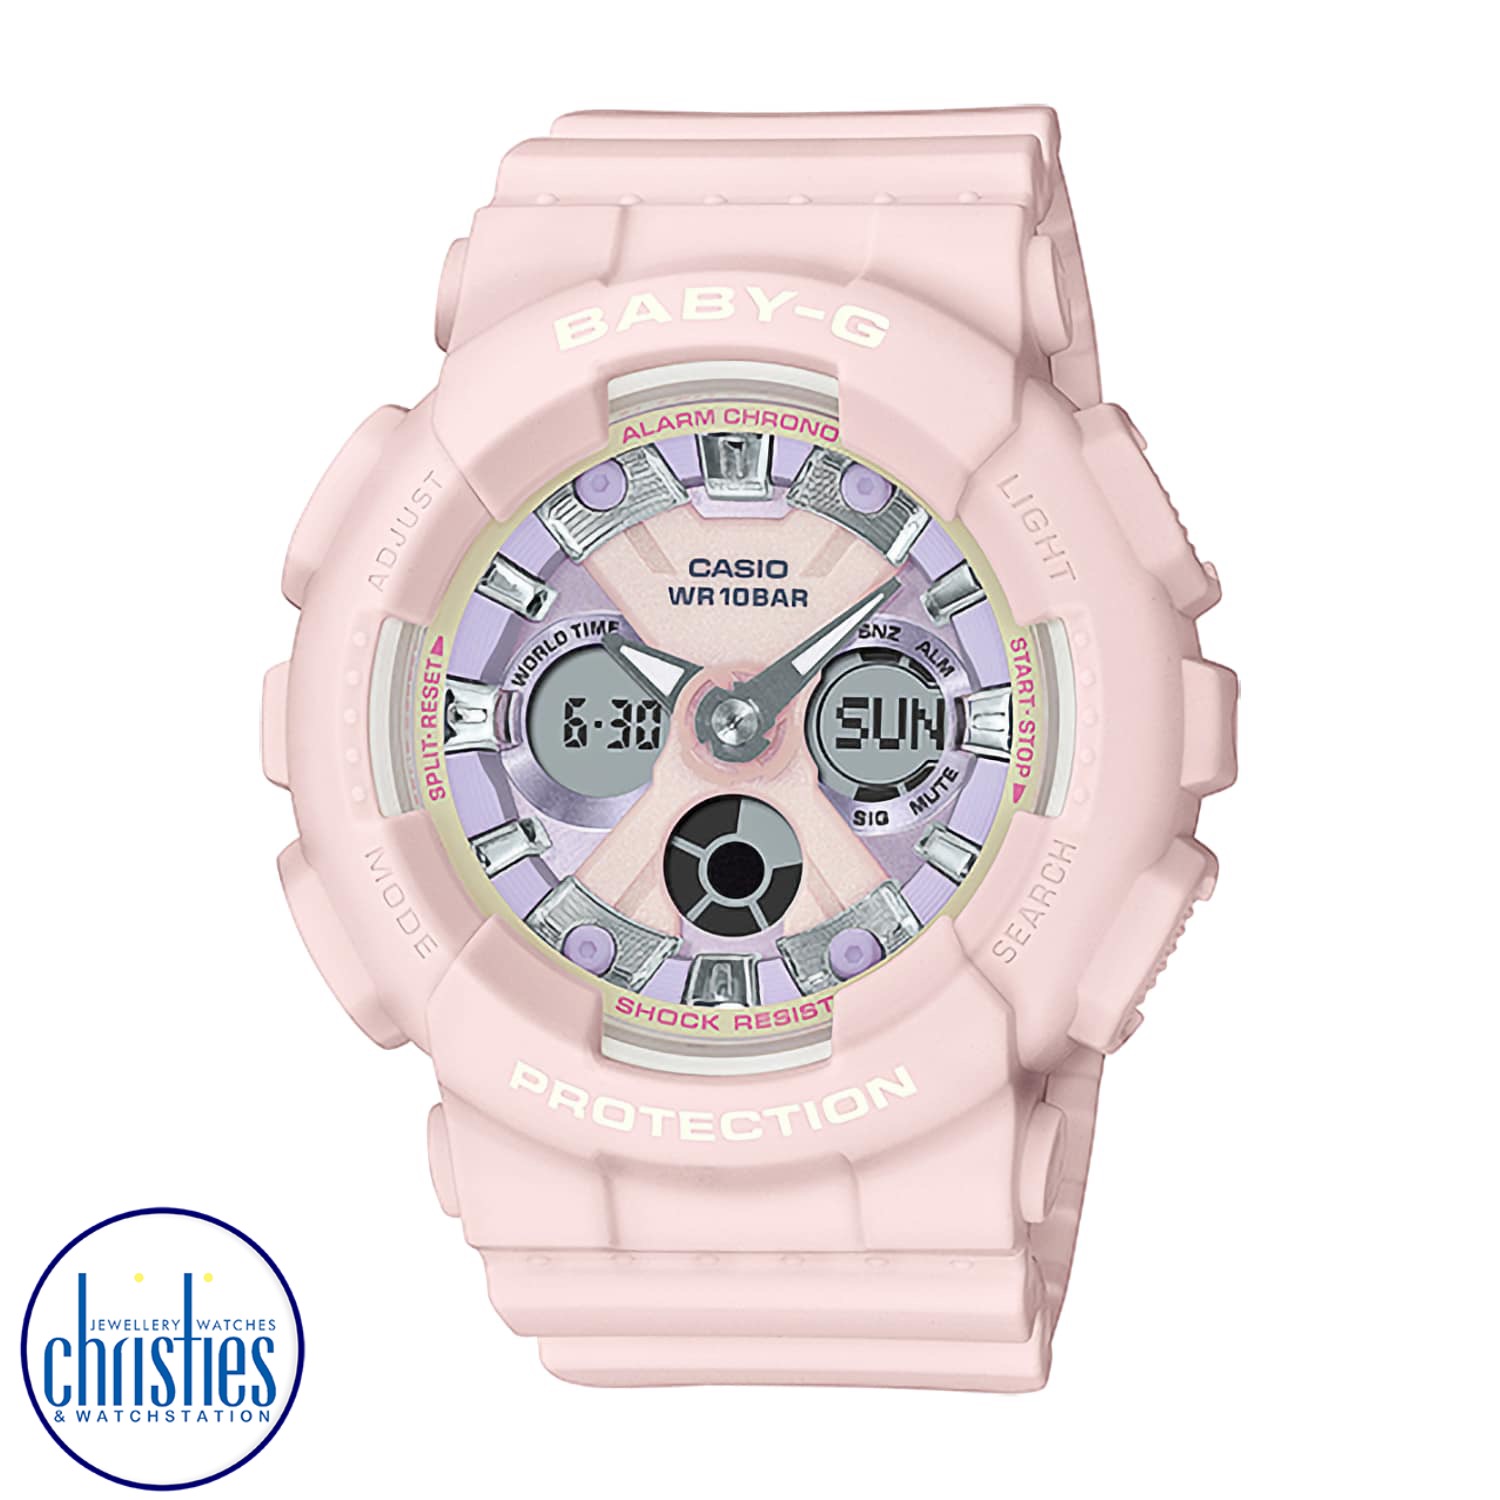 BA130WP-4A Casio BabY-G Watch Icy Pastel Series. Keep your cool with an icy pastel take on the ever-popular mannish BA-130 design with oversized case. Shock-resistant construction and water resistance up to 100 meters deliver the durable practicality you 